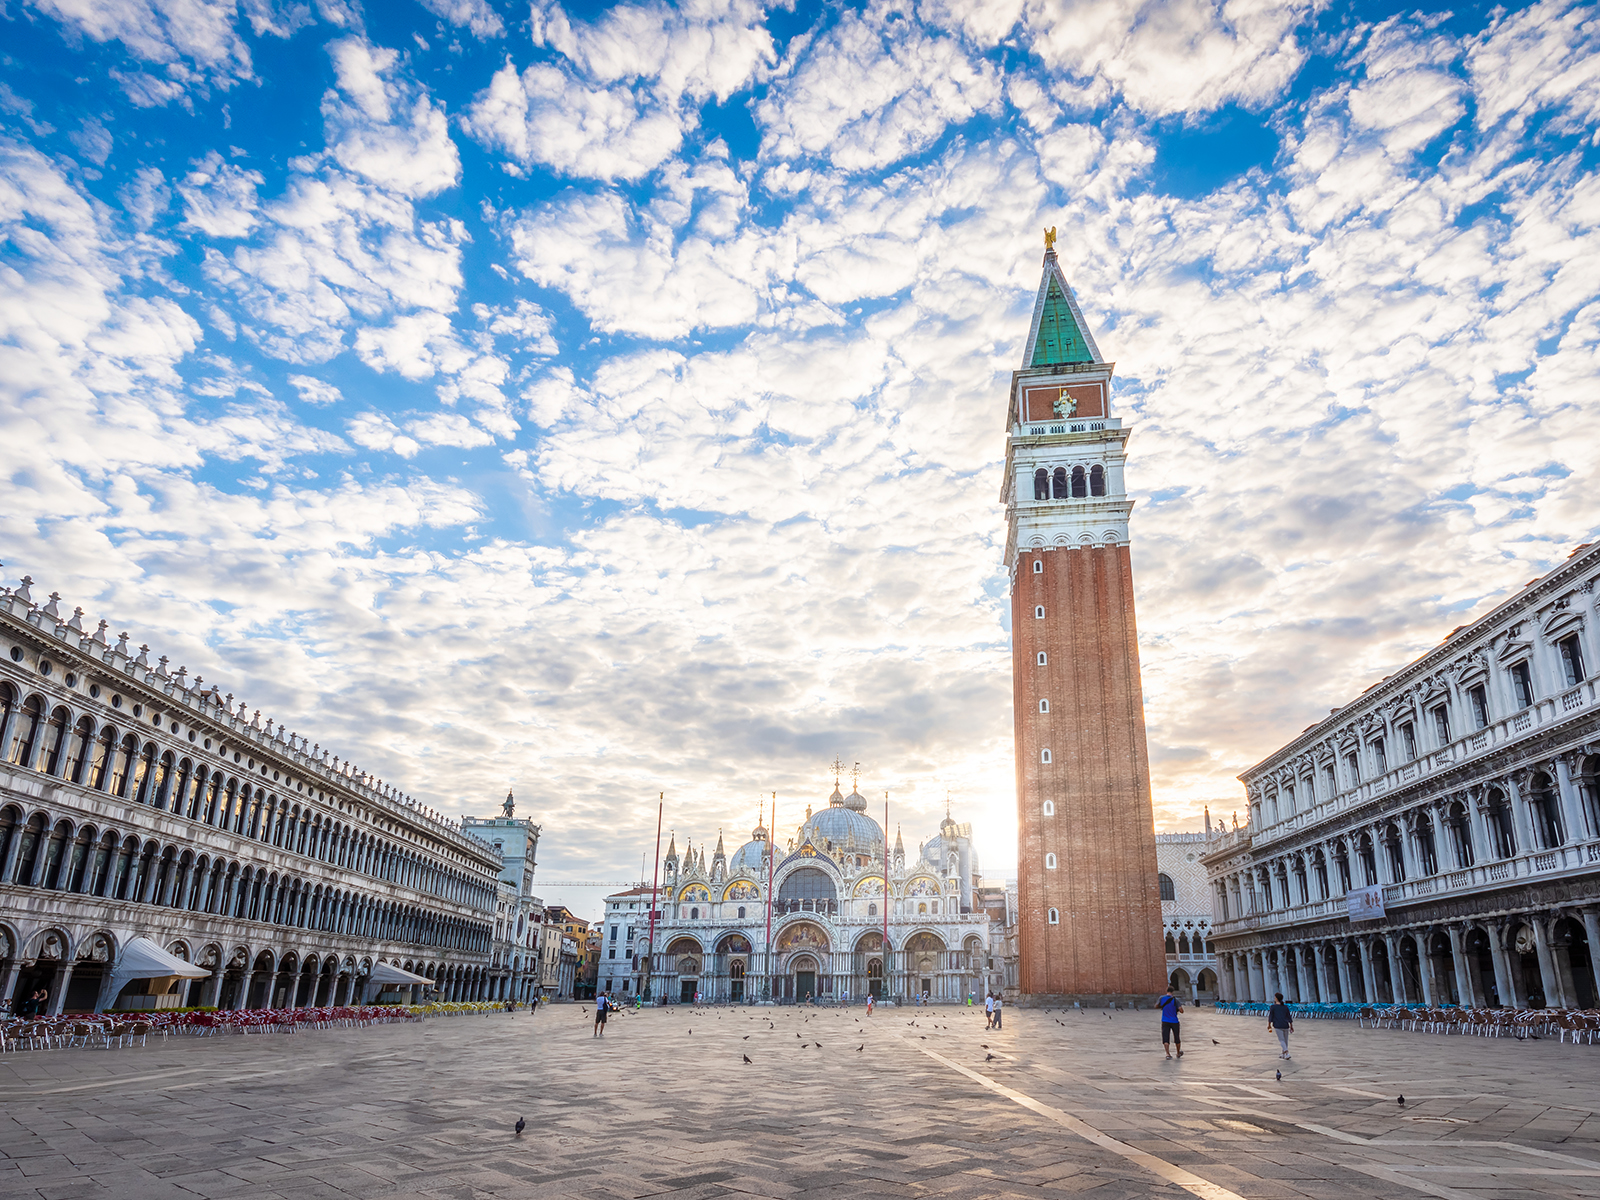 Piazza San Marco in Venice, Italy, the city's most famous public space